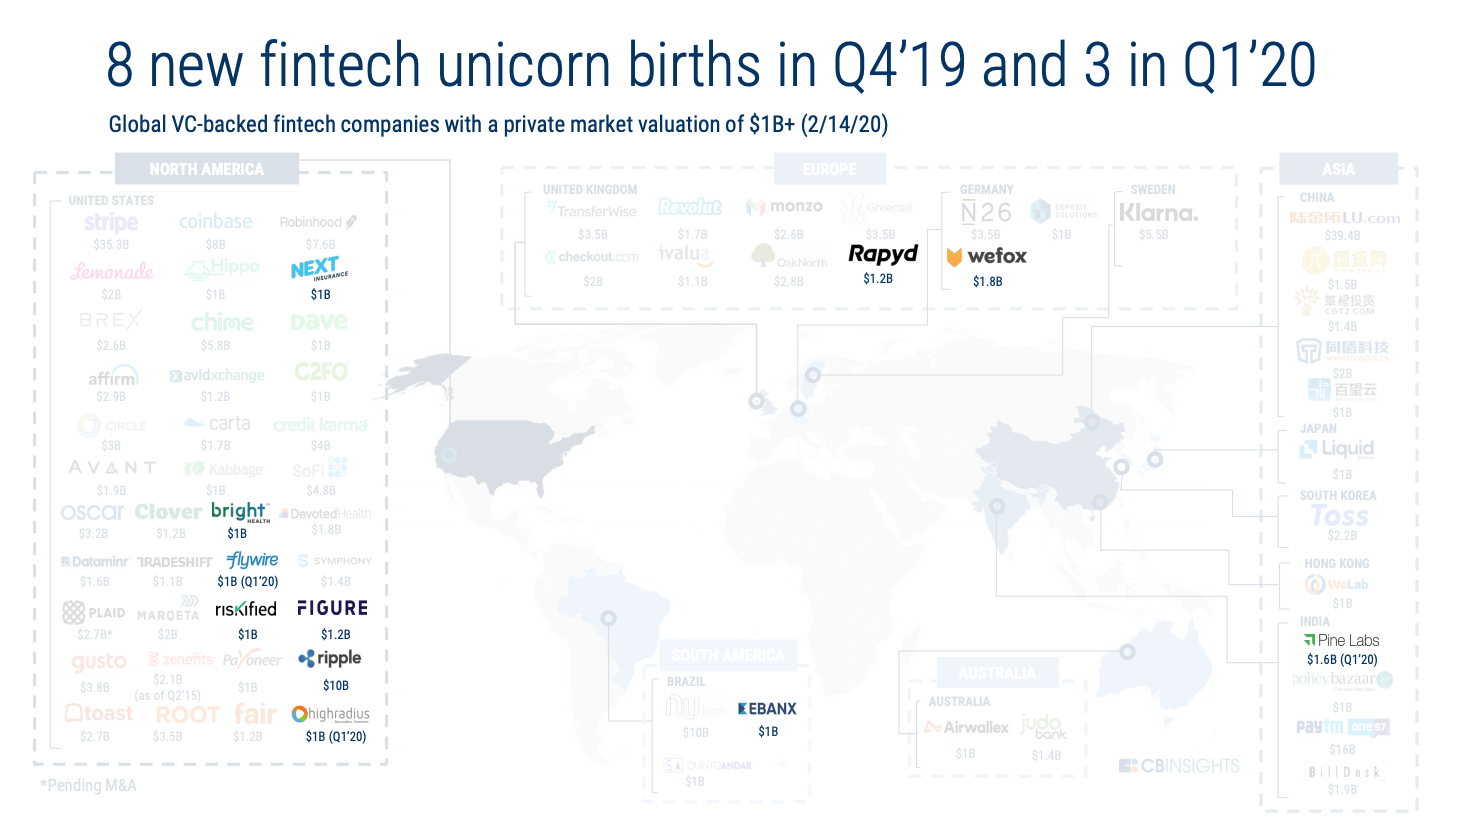 8 new fintech unicorn births in Q4’19 and 3 in Q1’20, State of Fintech- Investment & Sector Trends to Watch, CB Insights, February 2020